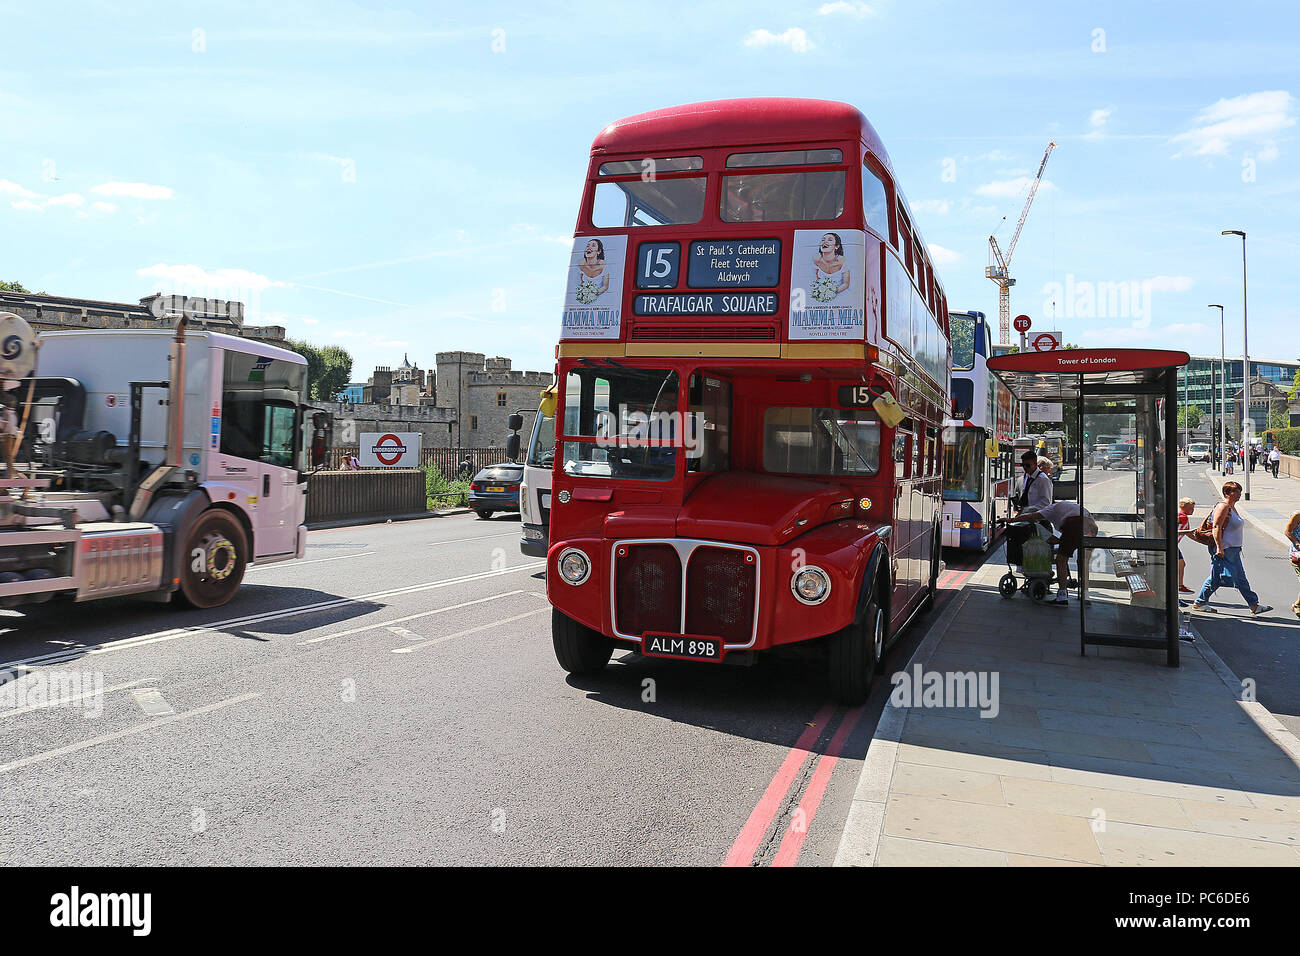 London Buses Routemaster Heritage Route 15, Central London, UK, 01 August 2018, London Buses Routemaster Heritage Route 15 runs between Trafalgar Square and Tower Hill using 1960's AEC Routemasters. It is the last and only regular London bus route using the original Routemaster bus. Credit: Rich Gold/Alamy Live News Stock Photo